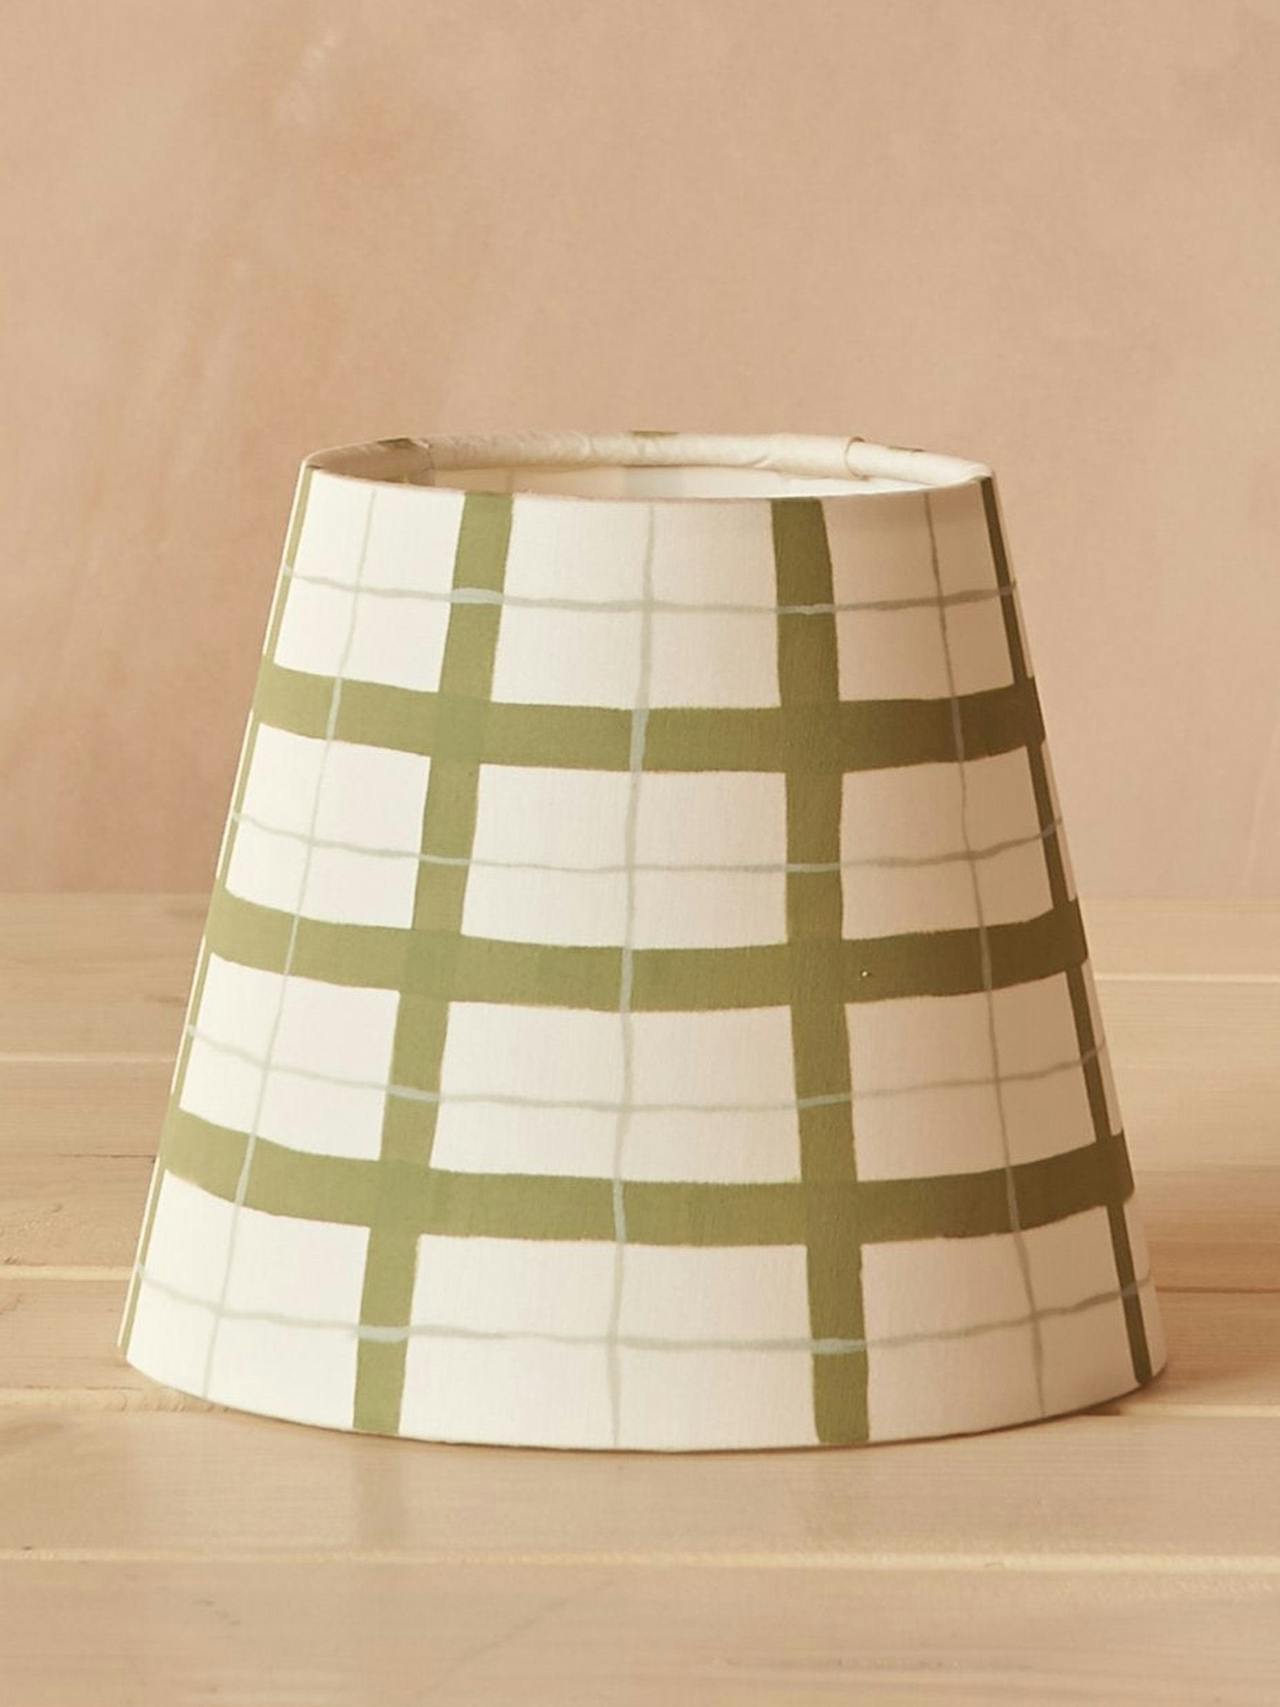 Mossy green gingham lampshade